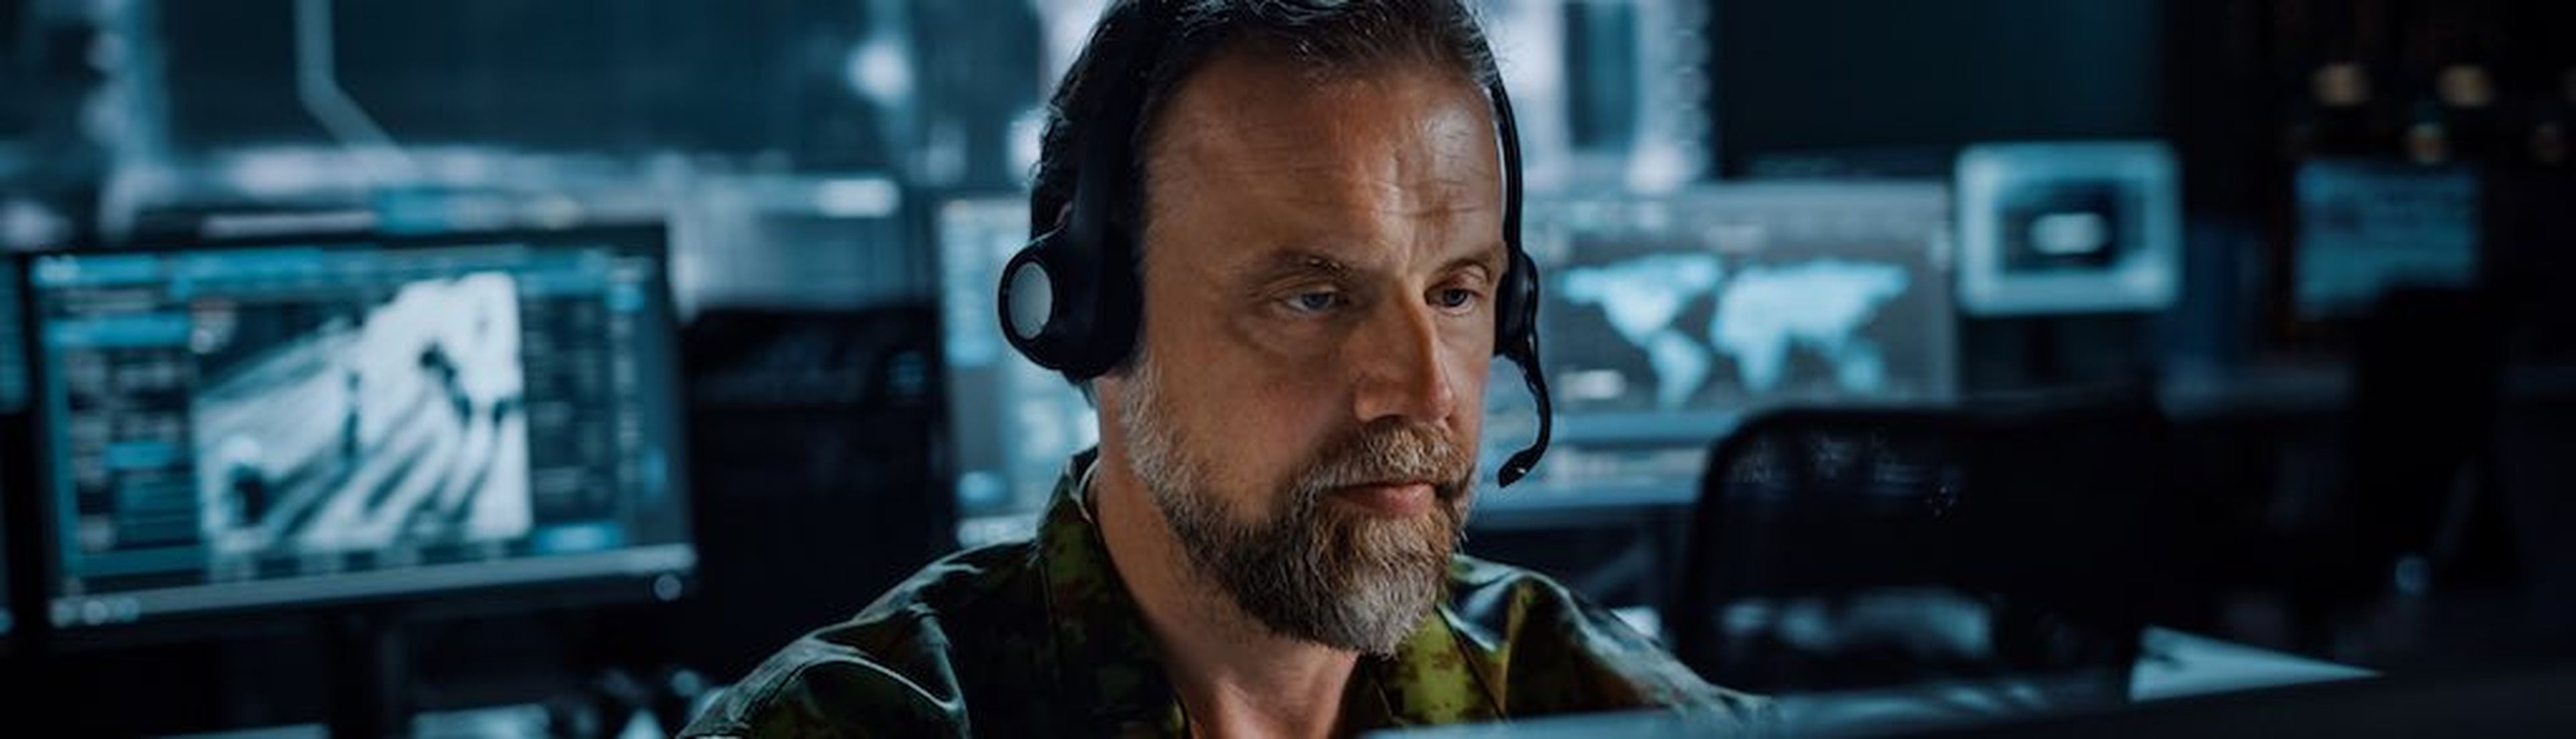 Bearded Military Surveillance Officer in Headset Working in a Central Office Hub for Cyber Operations, Control and Monitoring for Managing National Security, Technology and Army Communications. (Bearded Military Surveillance Officer in Headset Working